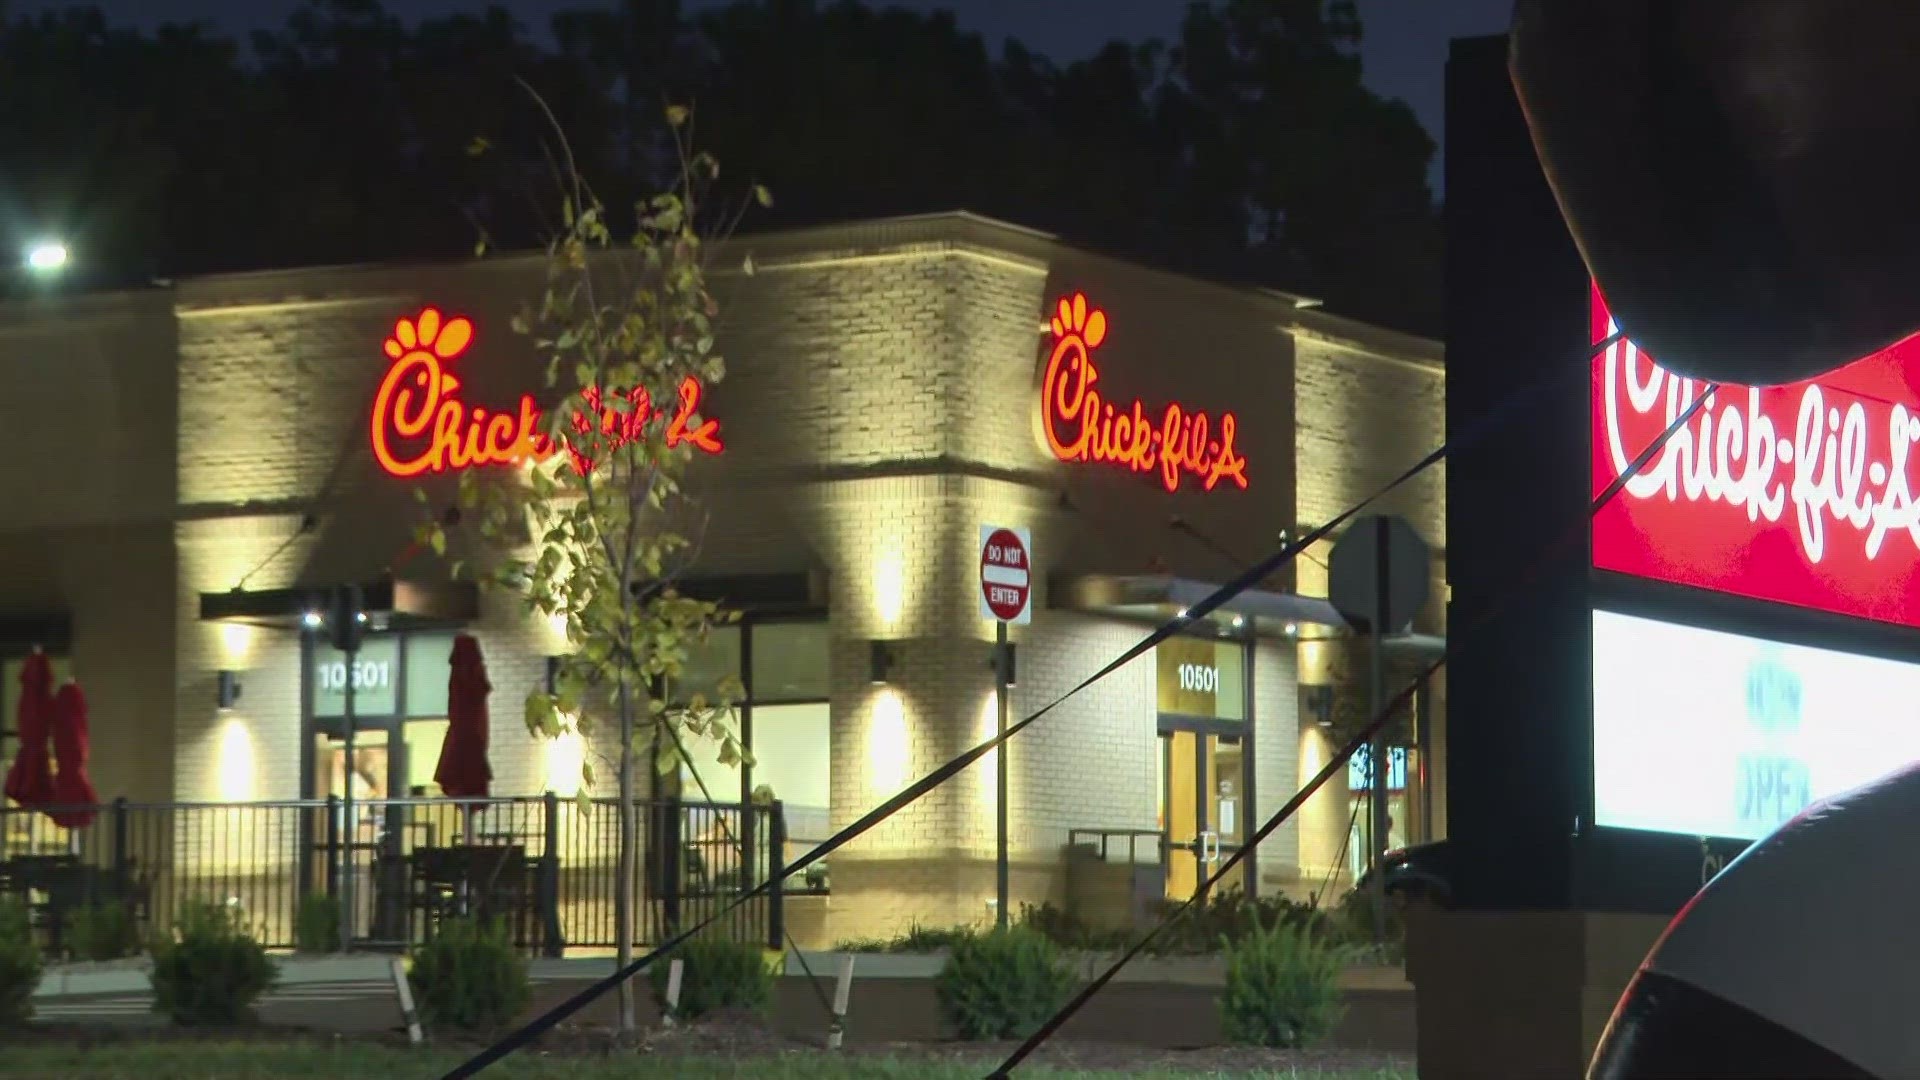 A new Chick-fil-a is now open in South Louisville.